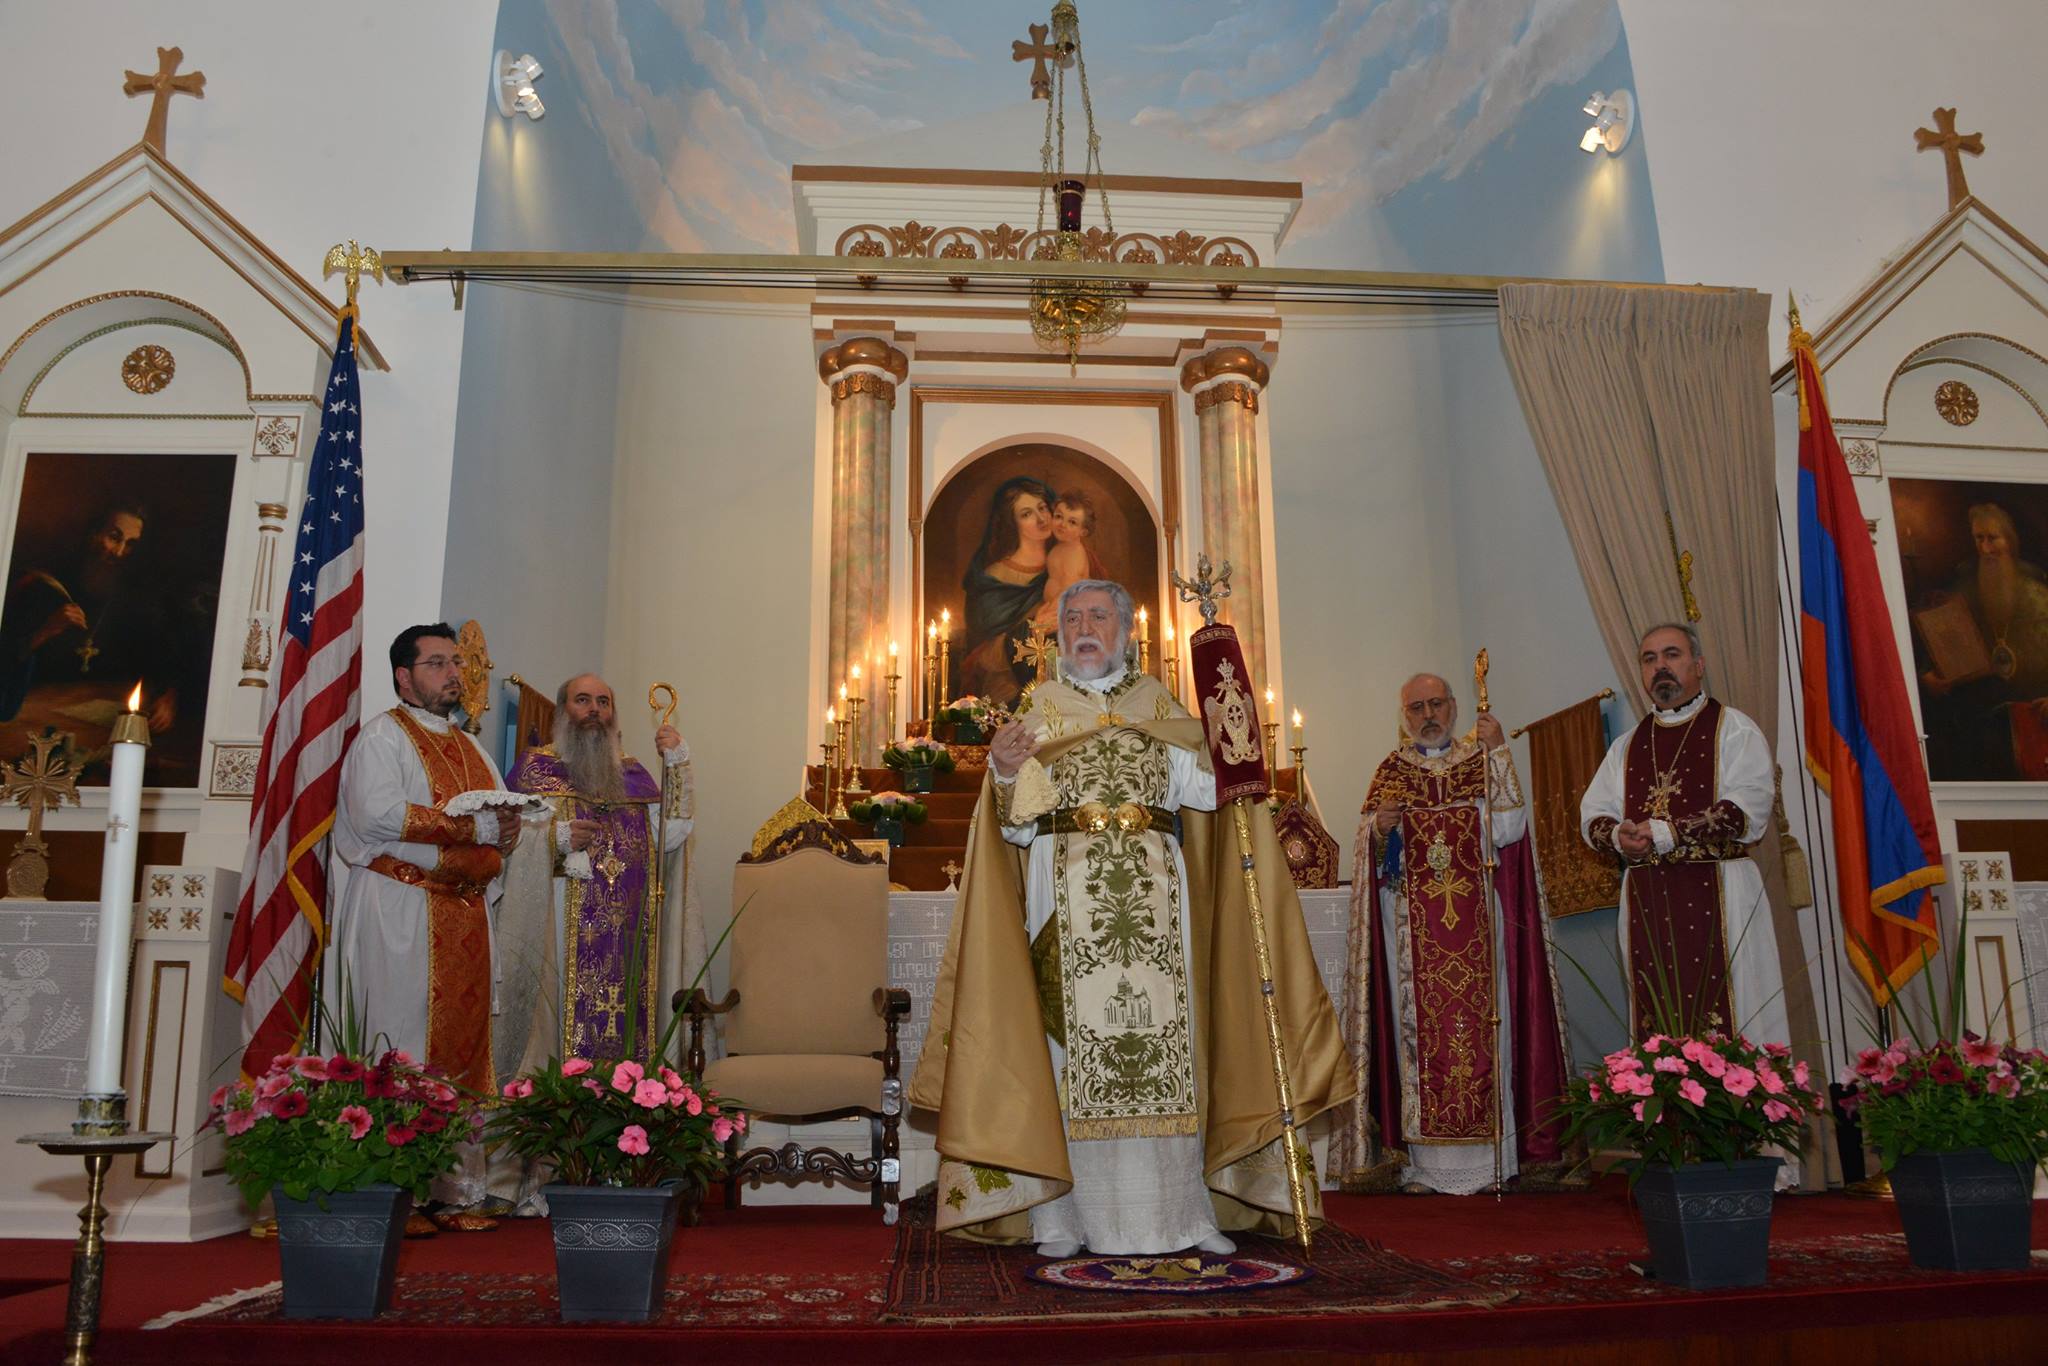 Holy Liturgy at St. Gregory Illuminator Cathedral in New York